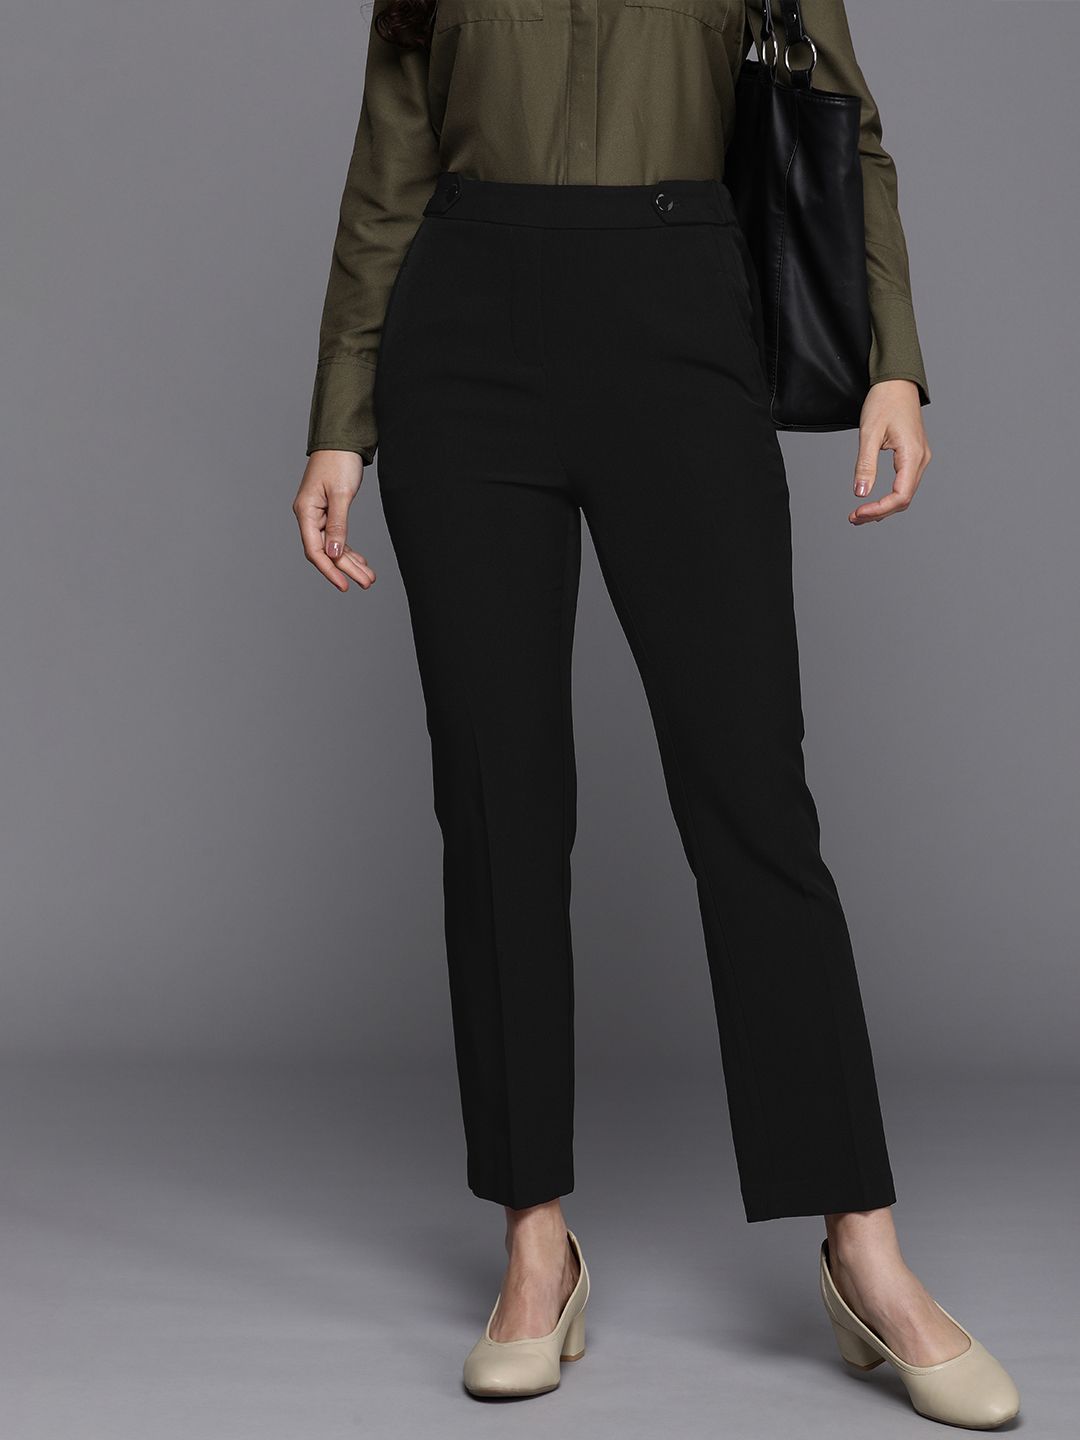 NEXT Women Solid Trousers Price in India